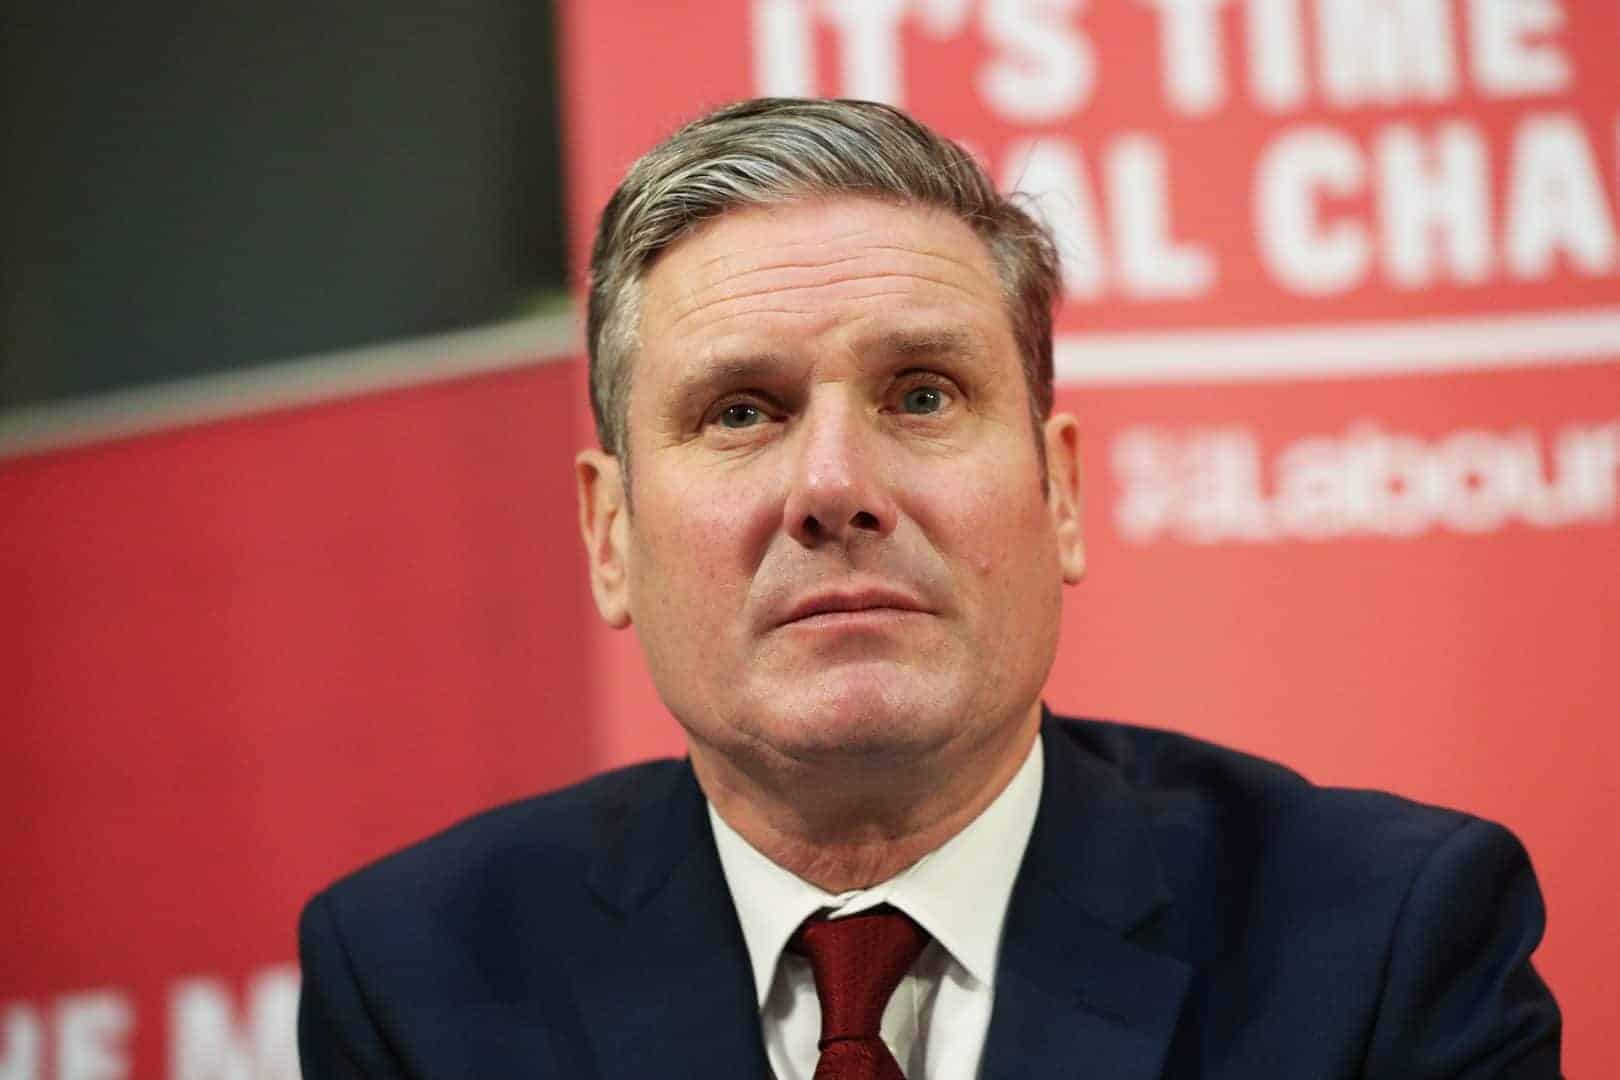 Conservative lead narrows as Starmer pulls ahead in leadership race